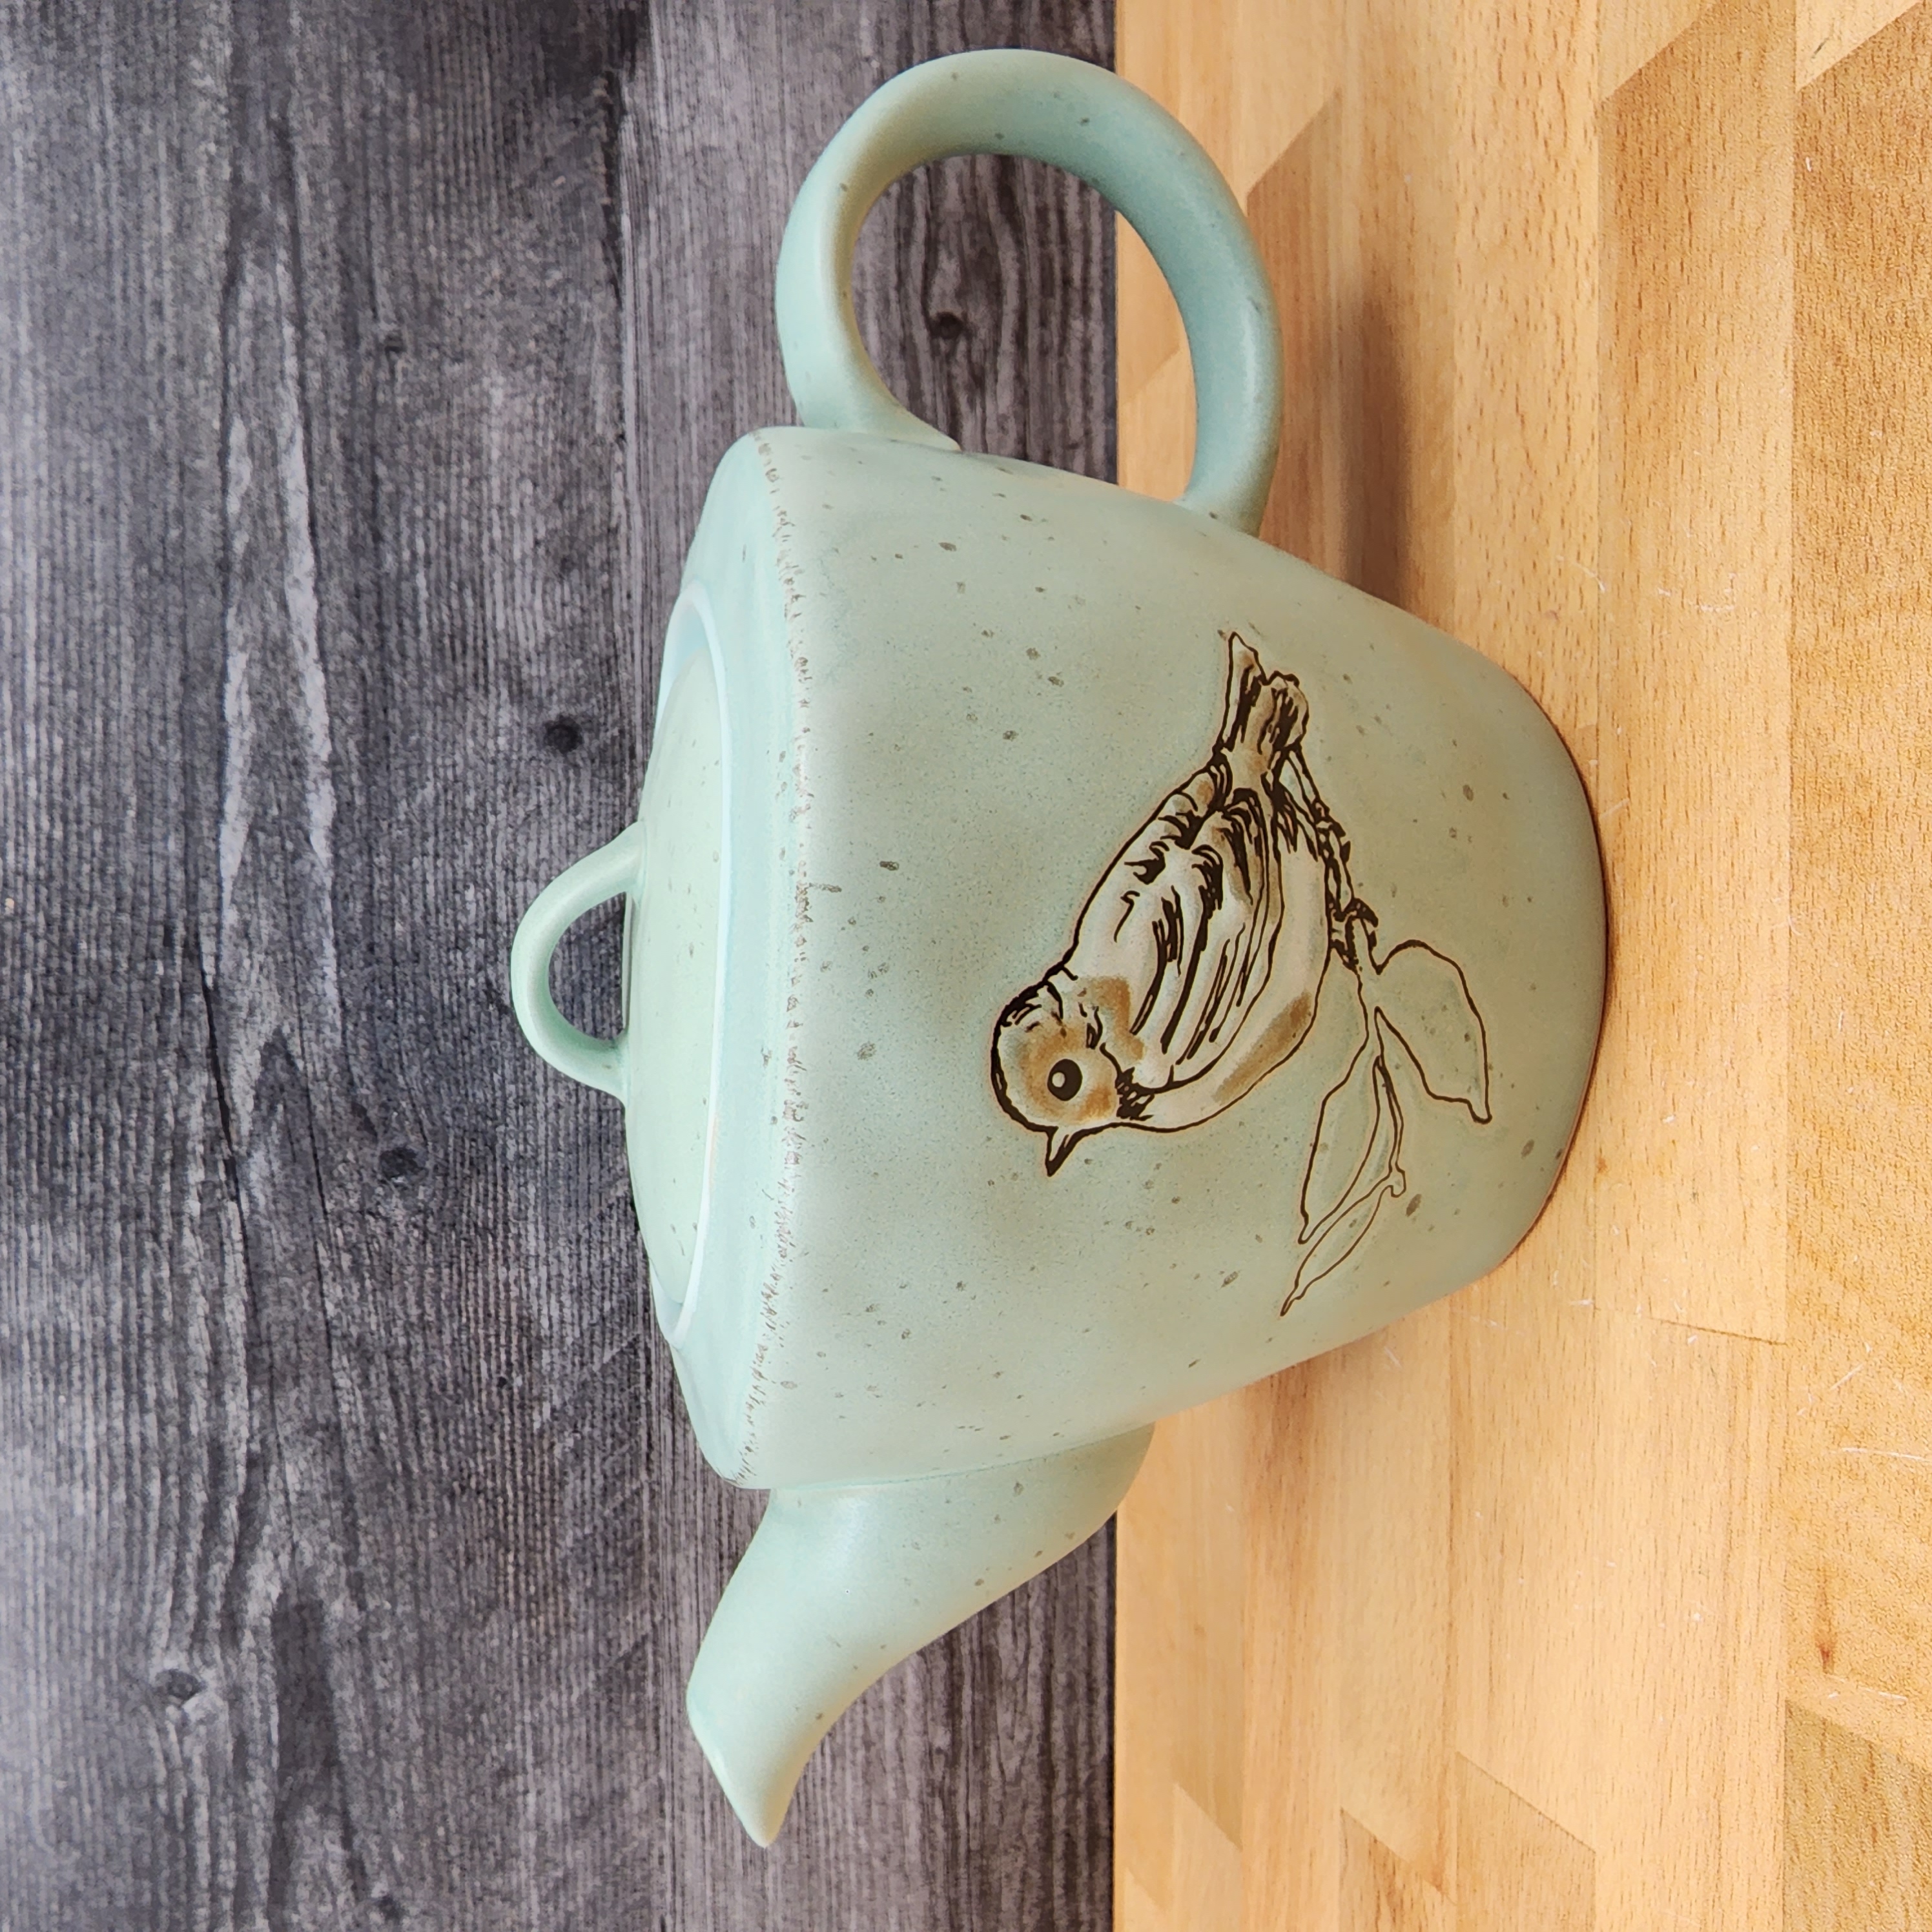 This Bird Embossed Teapot Kitchen Decorative Collectable by Blue Sky is made with love by Premier Homegoods! Shop more unique gift ideas today with Spots Initiatives, the best way to support creators.